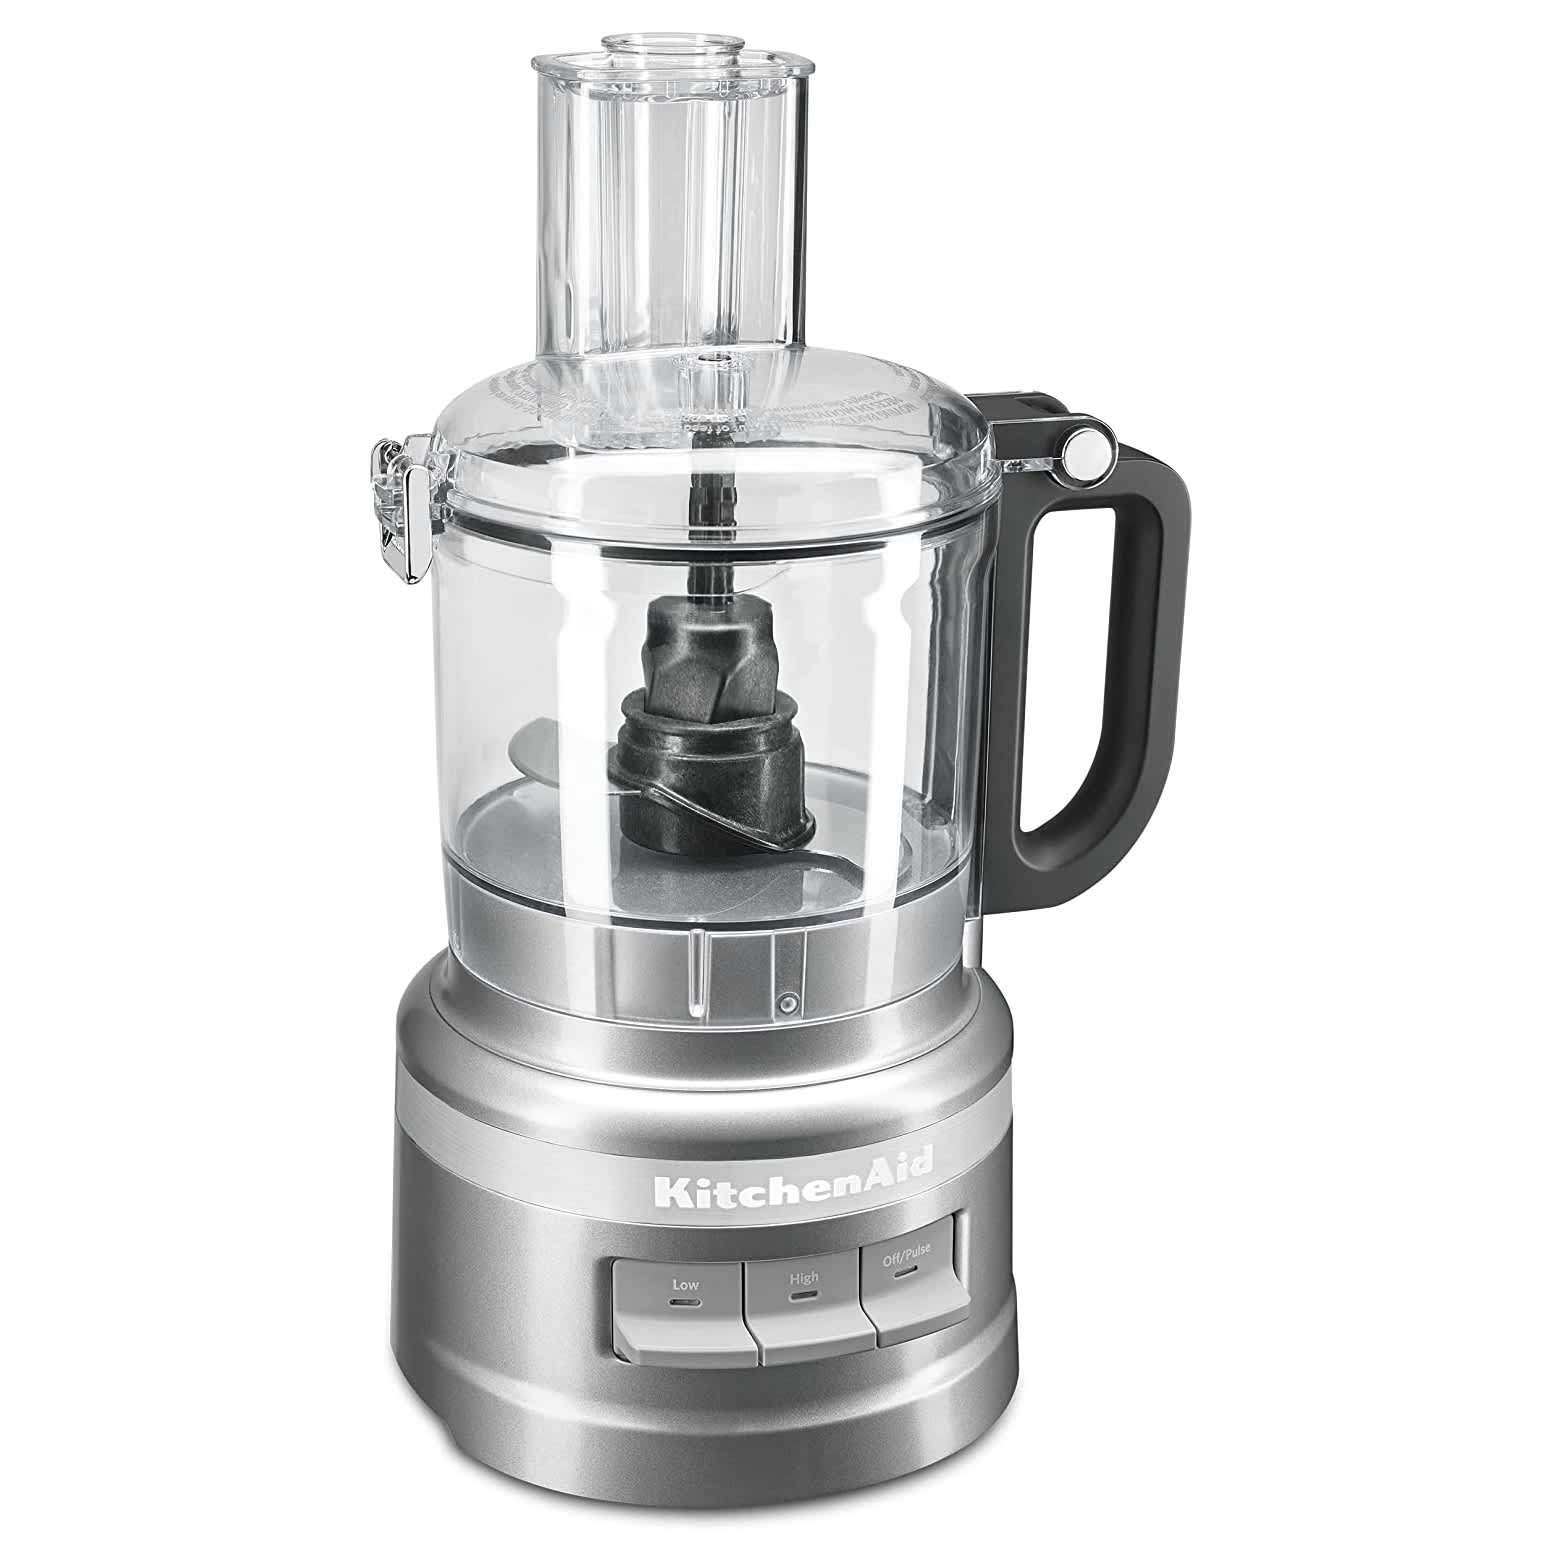 Food Processor vs Blender: What's The Difference?